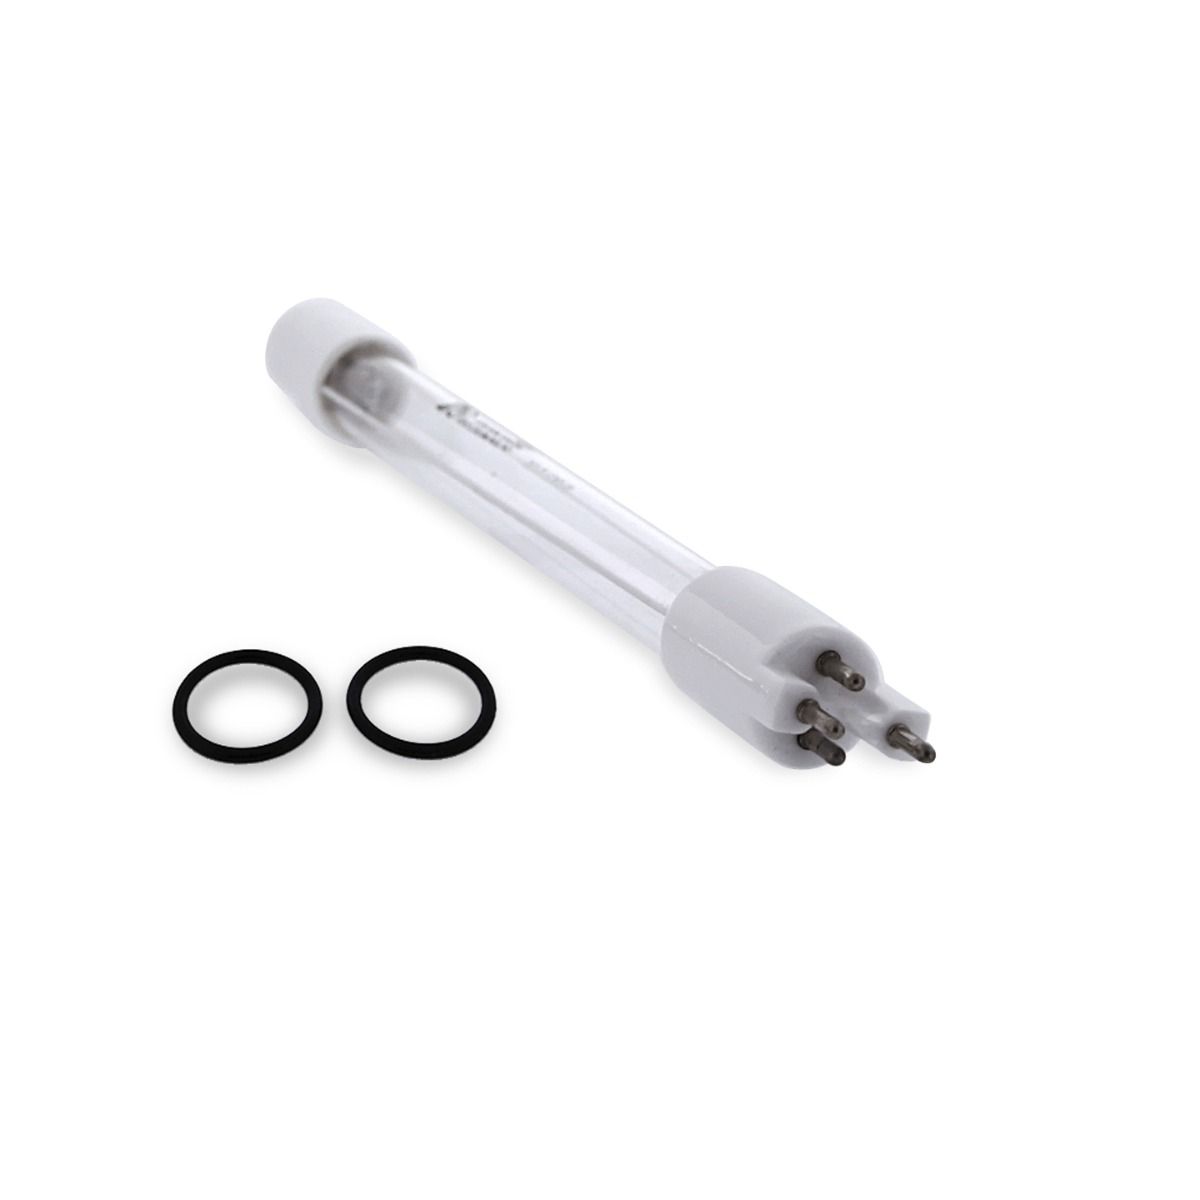 USWF Replacement for S330RL UV Lamp | Fits the VIQUA S2Q-PA, SC4, VT-4, &amp; SSM-17 Series UV Systems